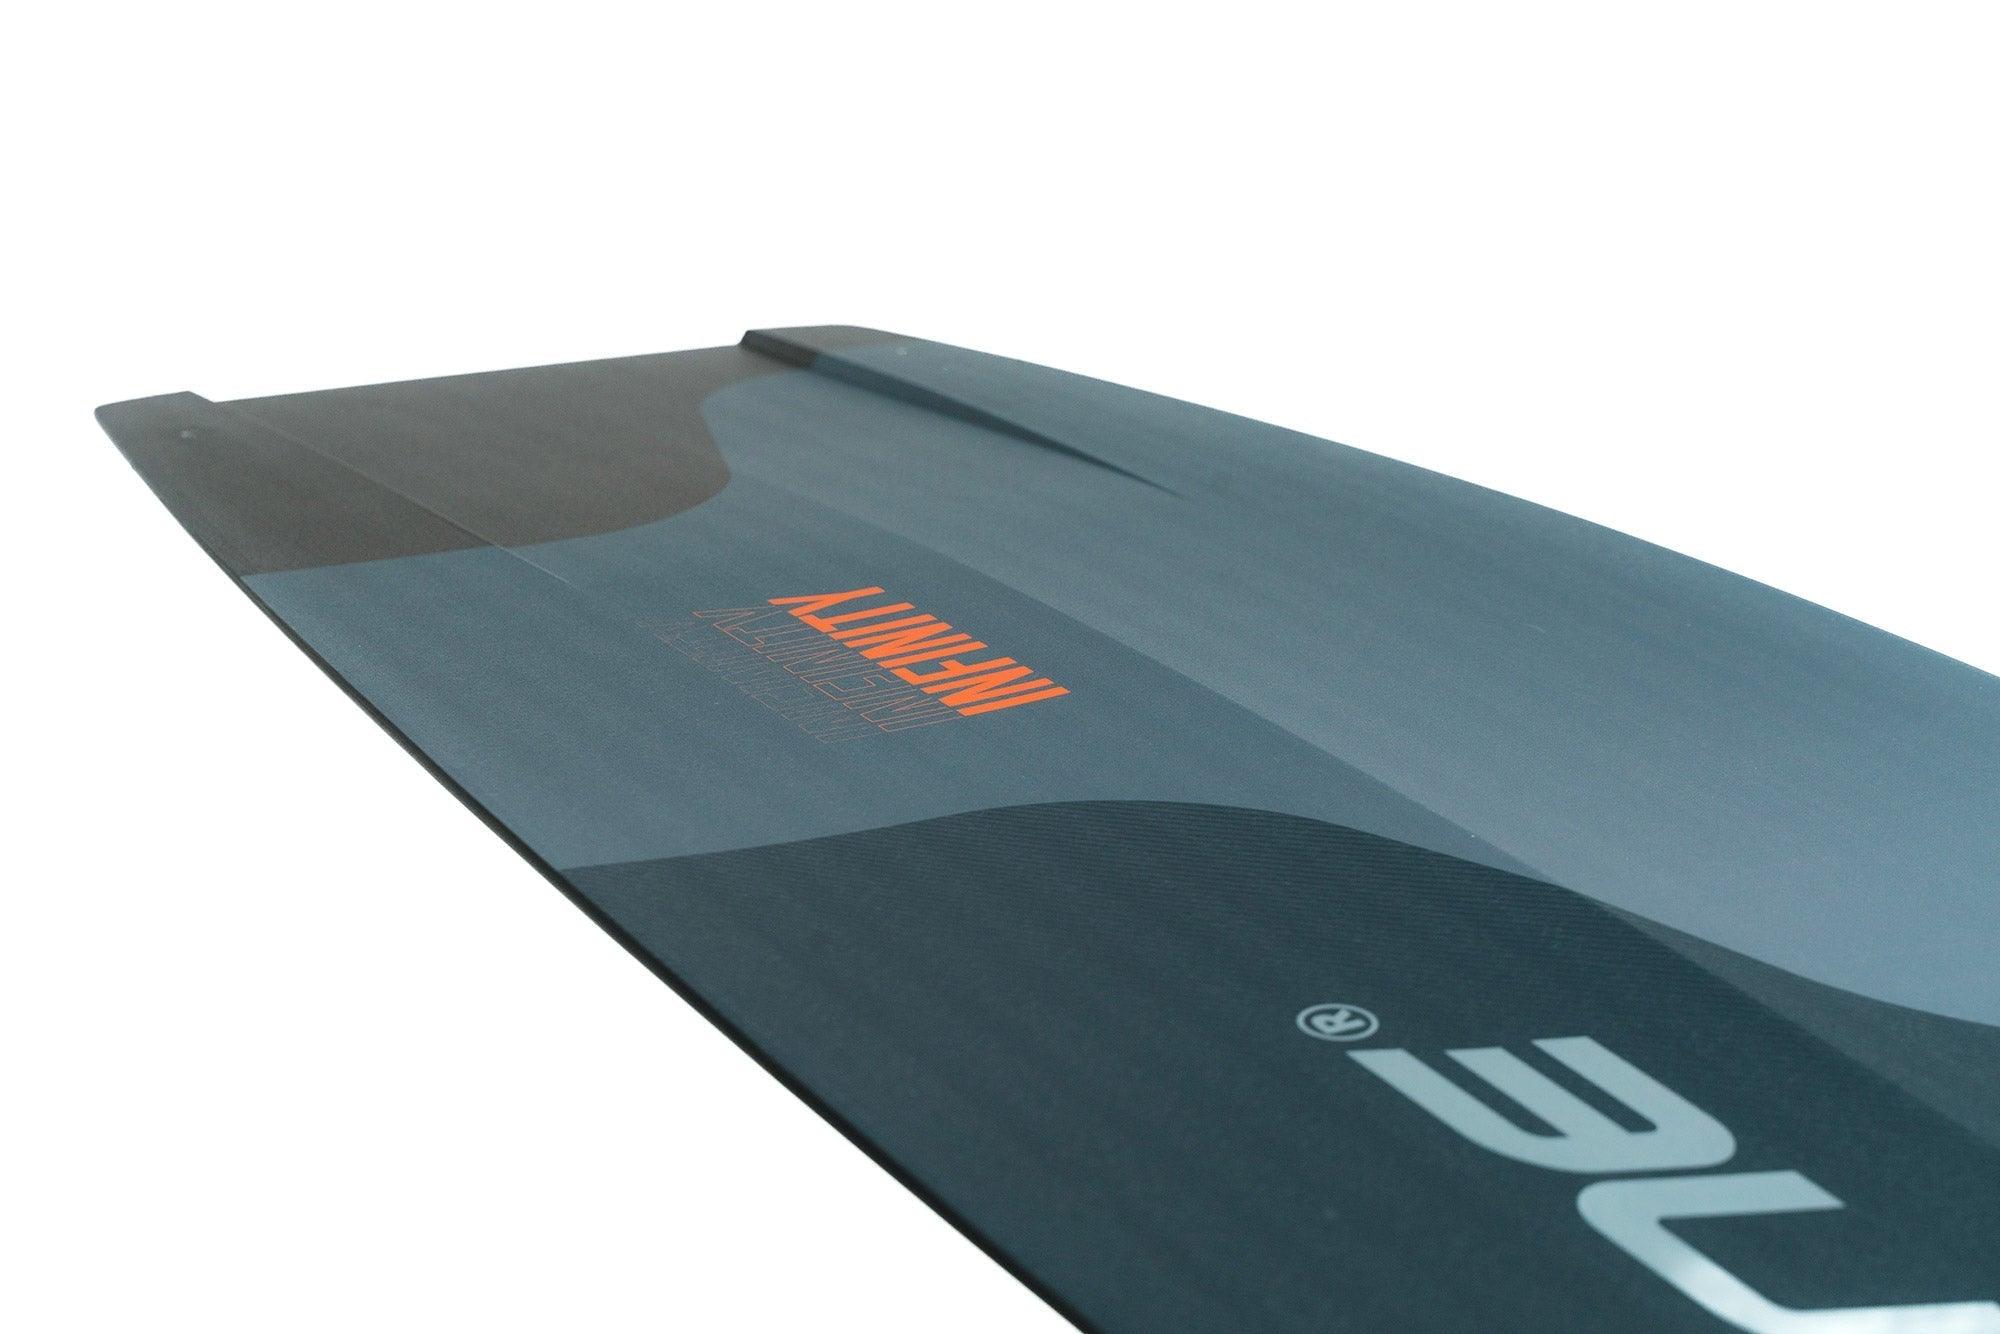 Ozone Infinity V3 Board only with fins and handle - The Kite Loft